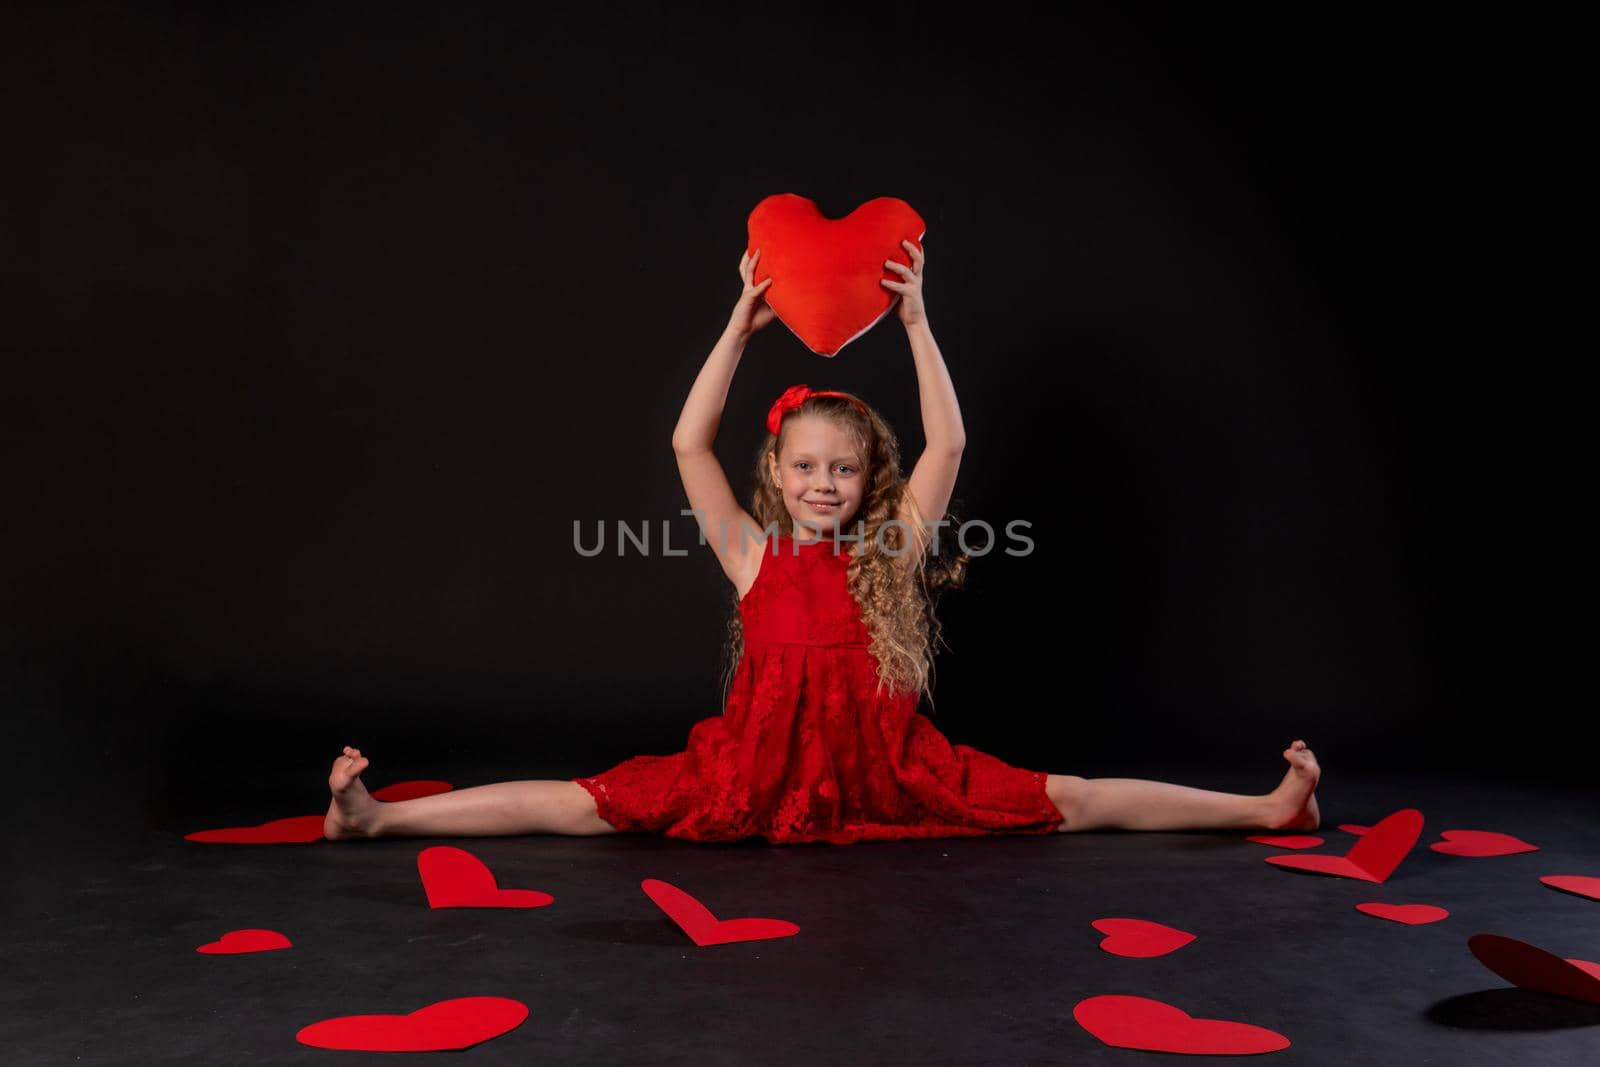 In twine in the hands of the heart paper hearts red, design, on the floor hearts lovely romance. inspiration. copy space feeling, black in red girl dress, barefoot by 89167702191